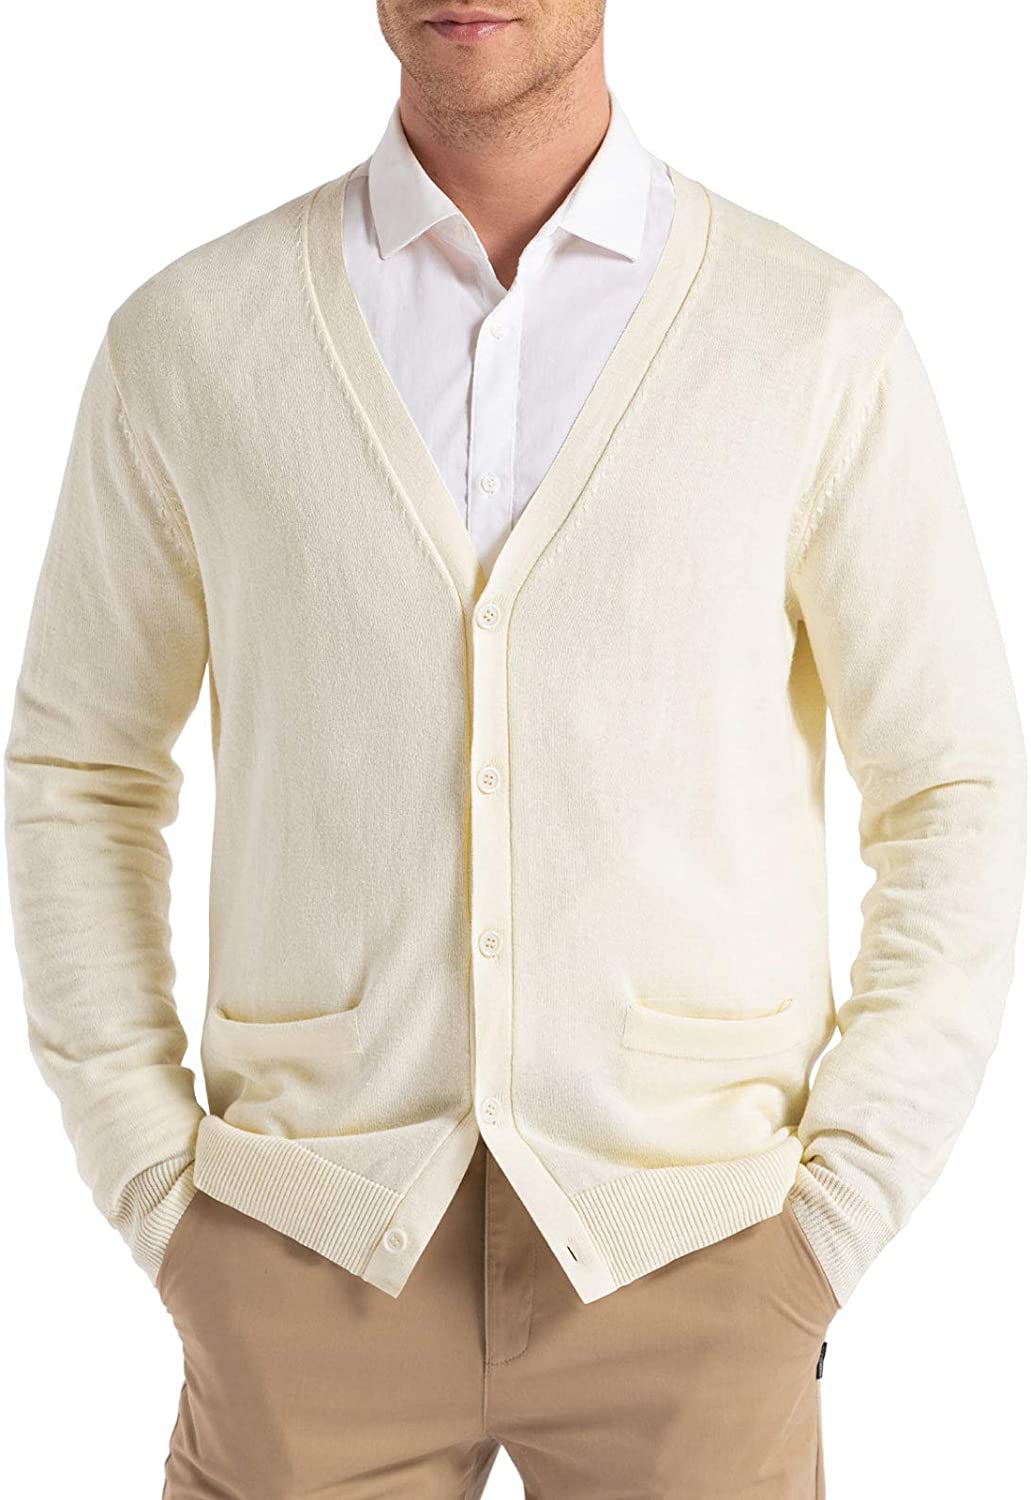 QUALFORT Mens Cardigan Sweater 100% Cotton Pockets Casual Slim Fit V-Neck Knitted Sweaters Button up